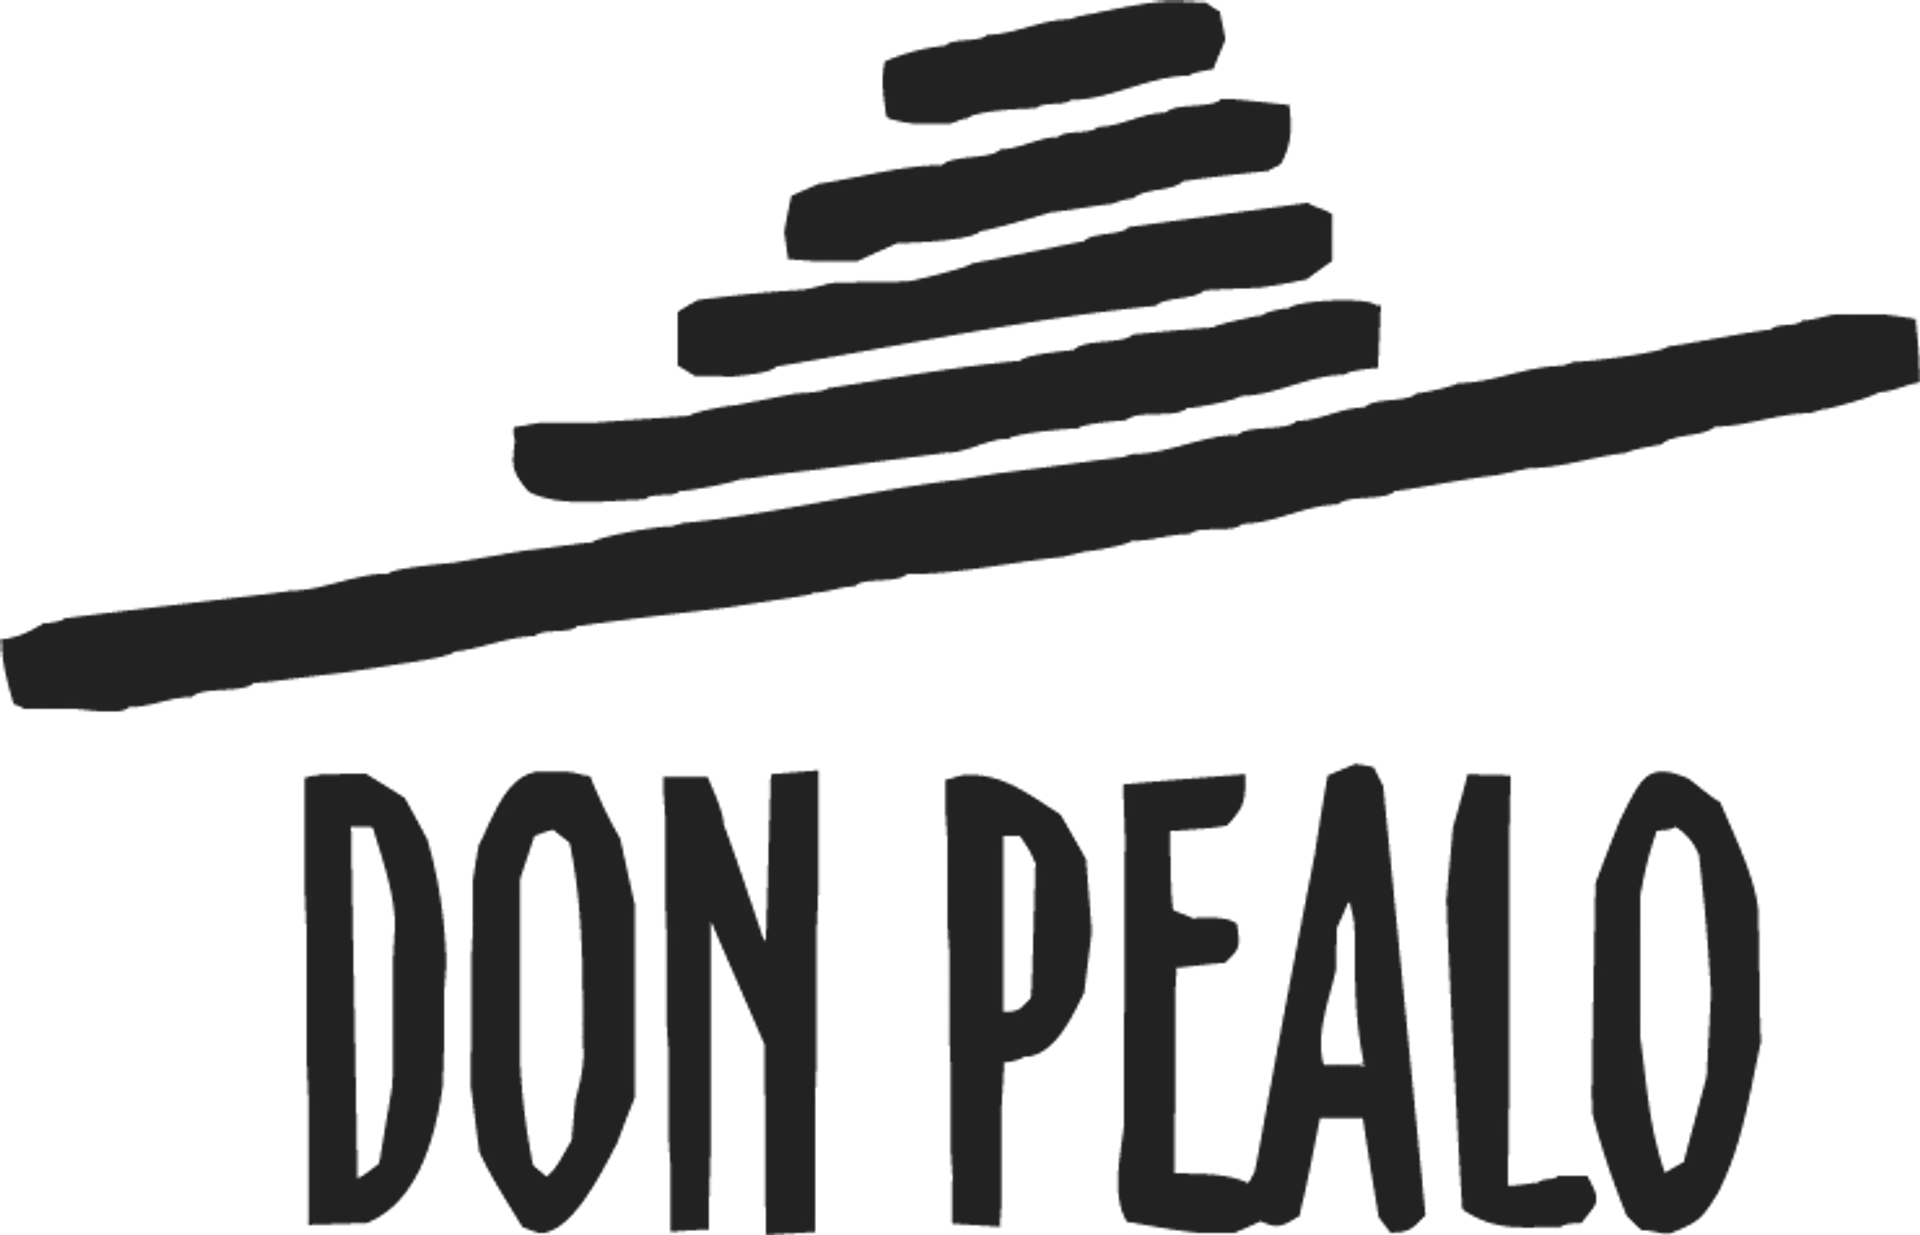 DON PEALO logo of current catalogue